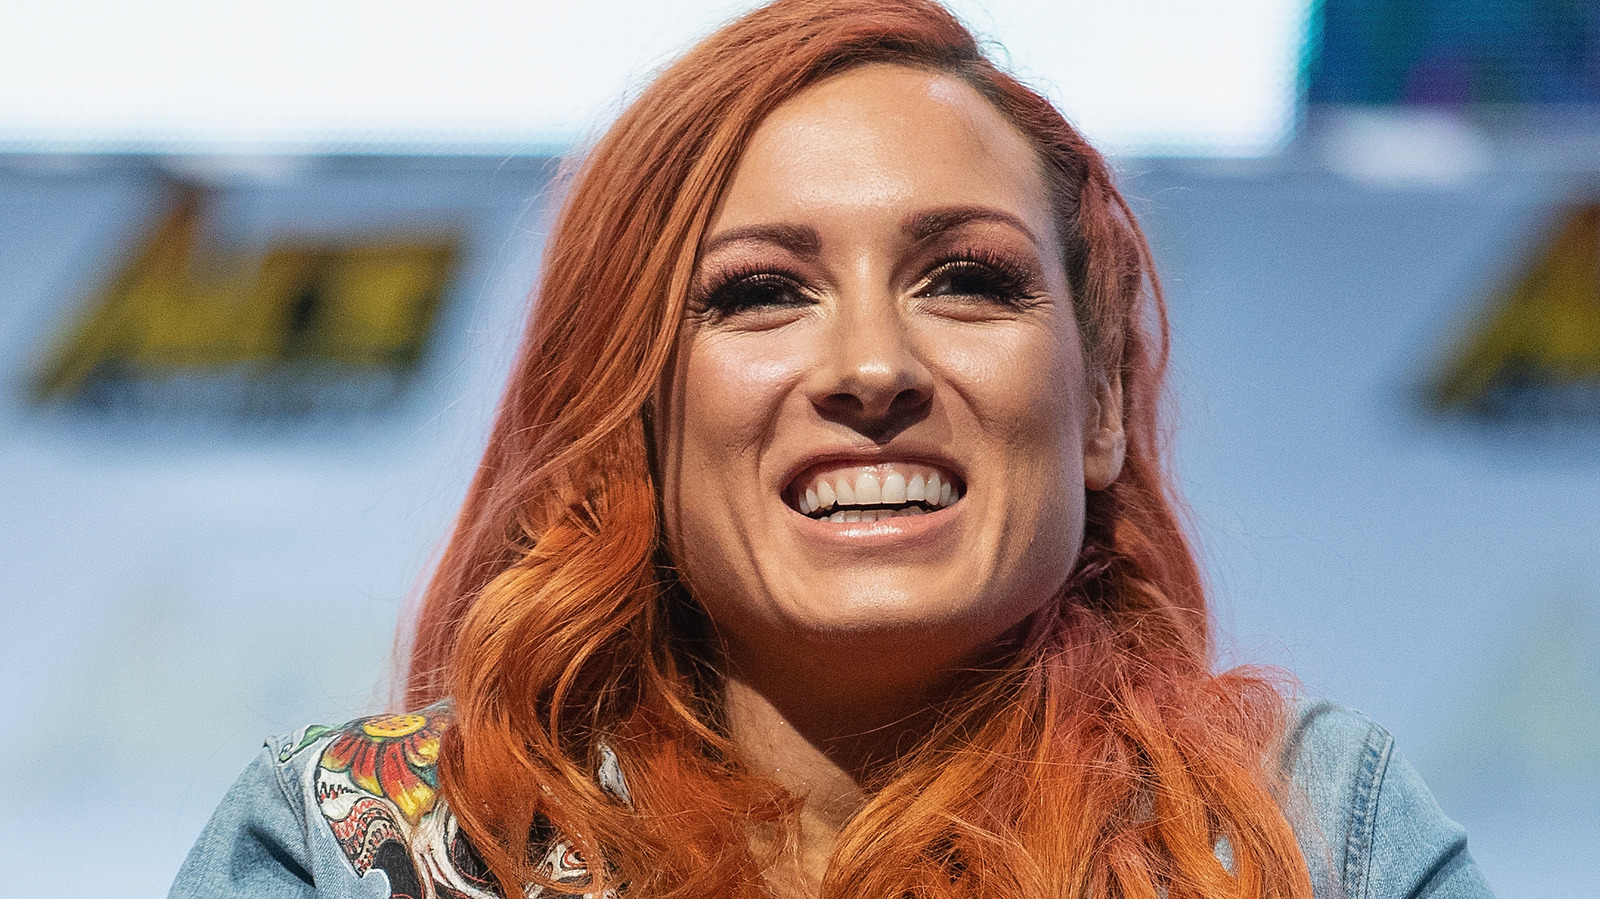 WWE RAW Results: Becky Lynch Beats Bayley in a Steel Cage Match - News18